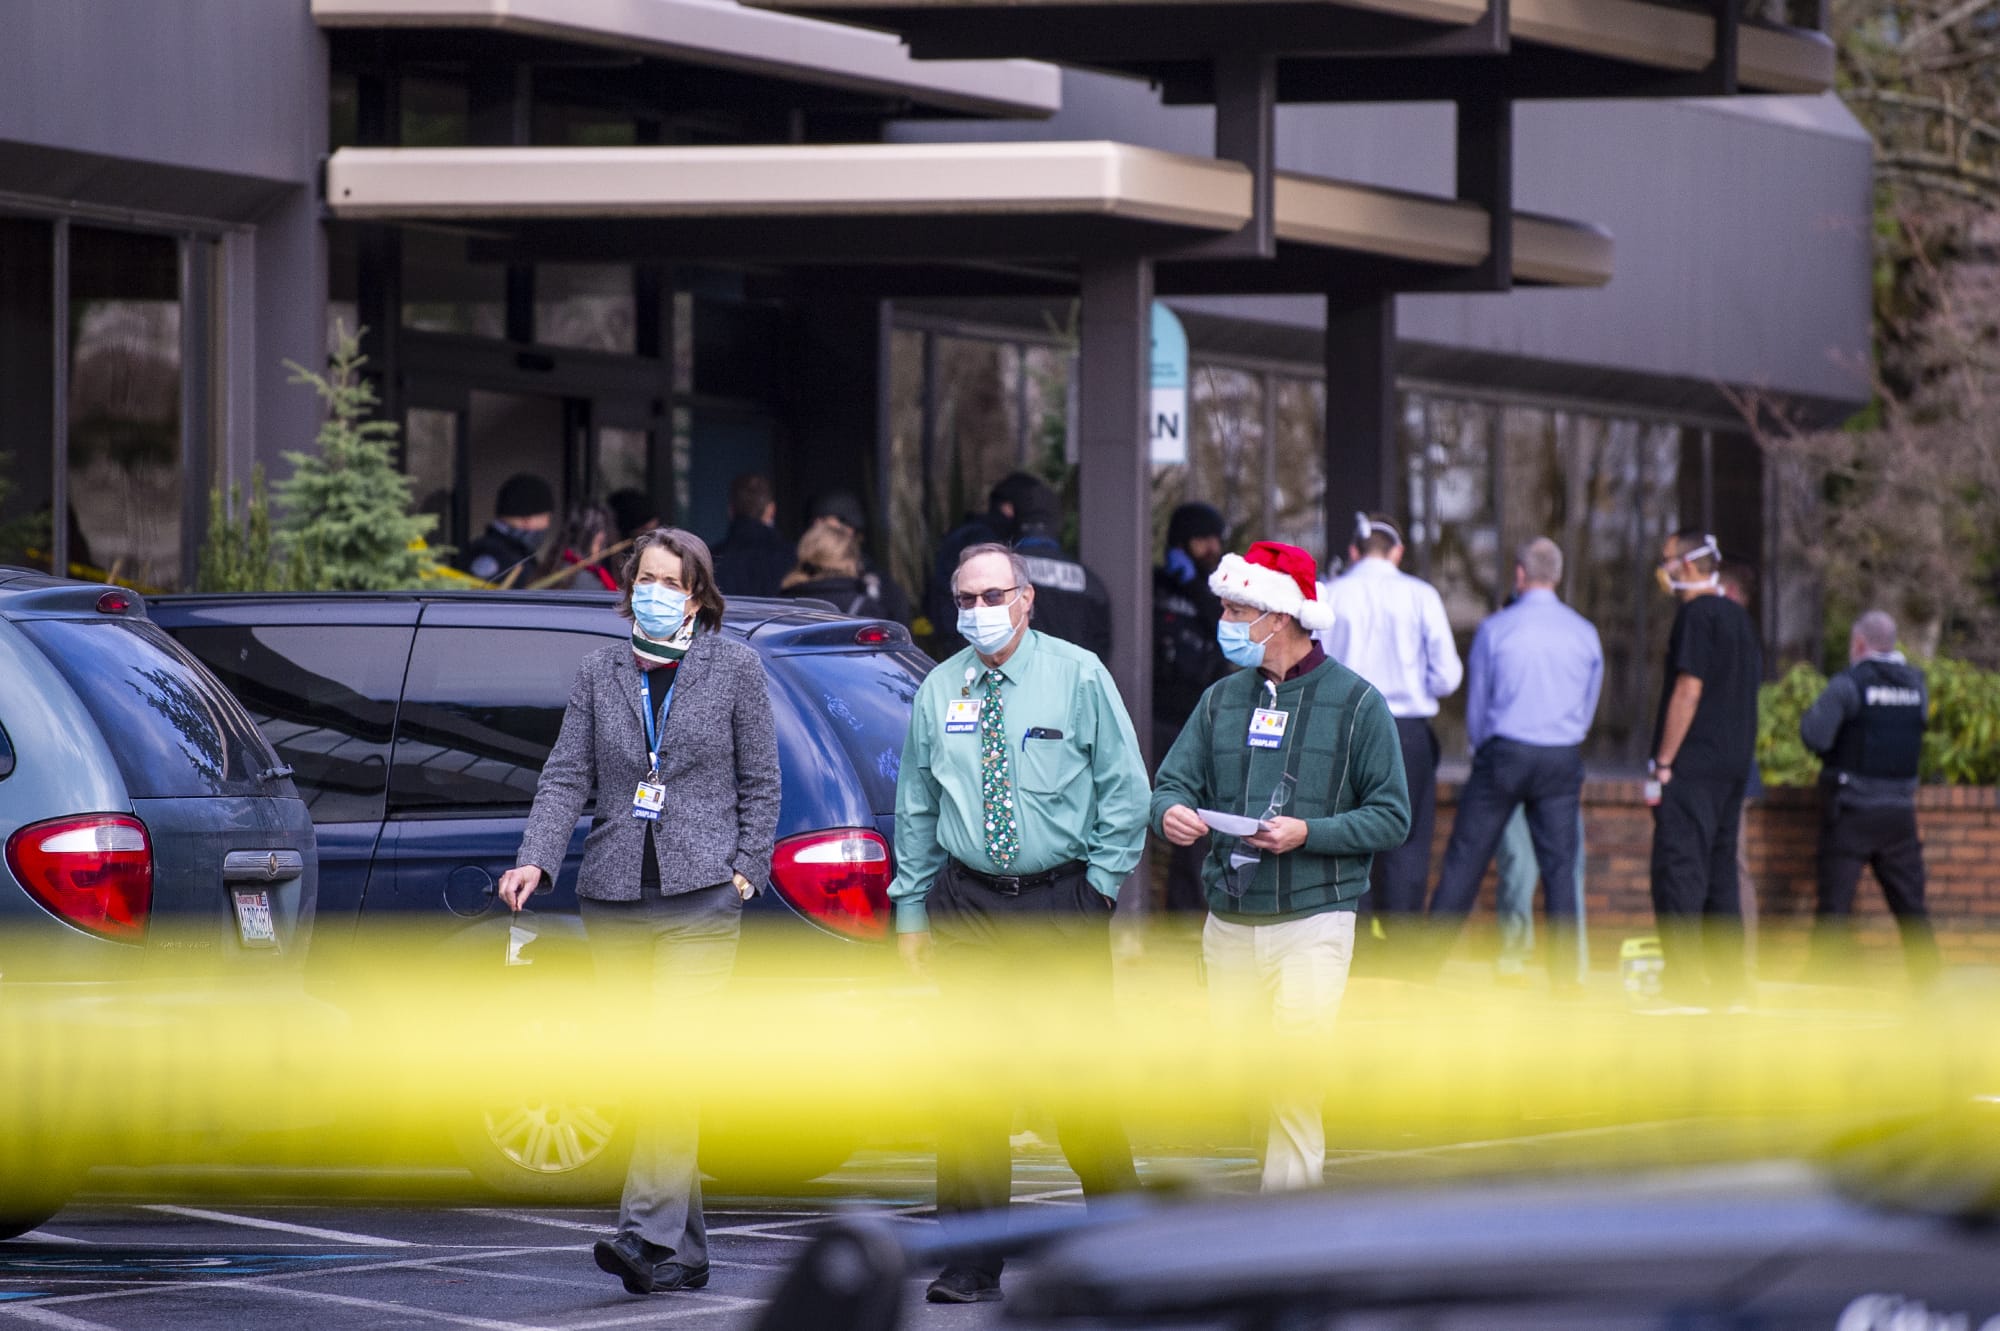 Three chaplains exit the building where a shooting reportedly occurred on Tuesday, December 22, at the 505 building at the PeaceHealth Southwest Medical Center.